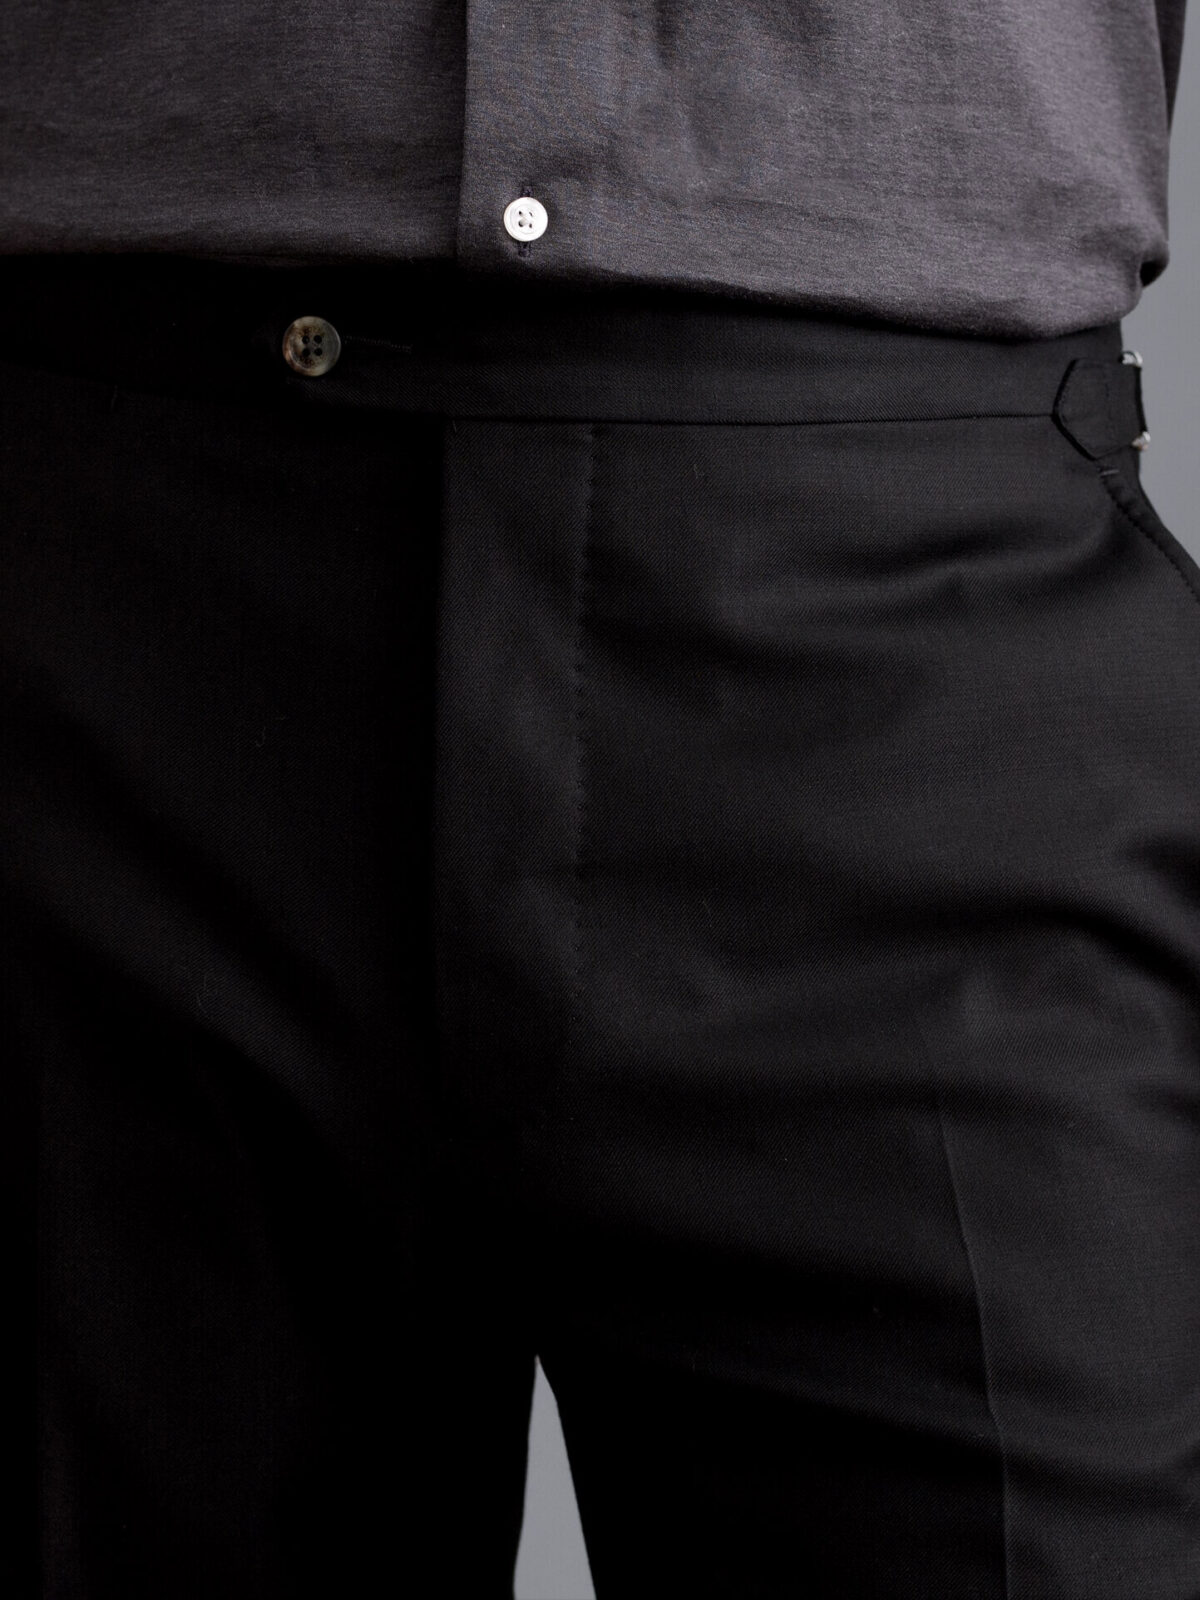 Slim Fit Dinner Suit Trousers with Side Adjusters in Black